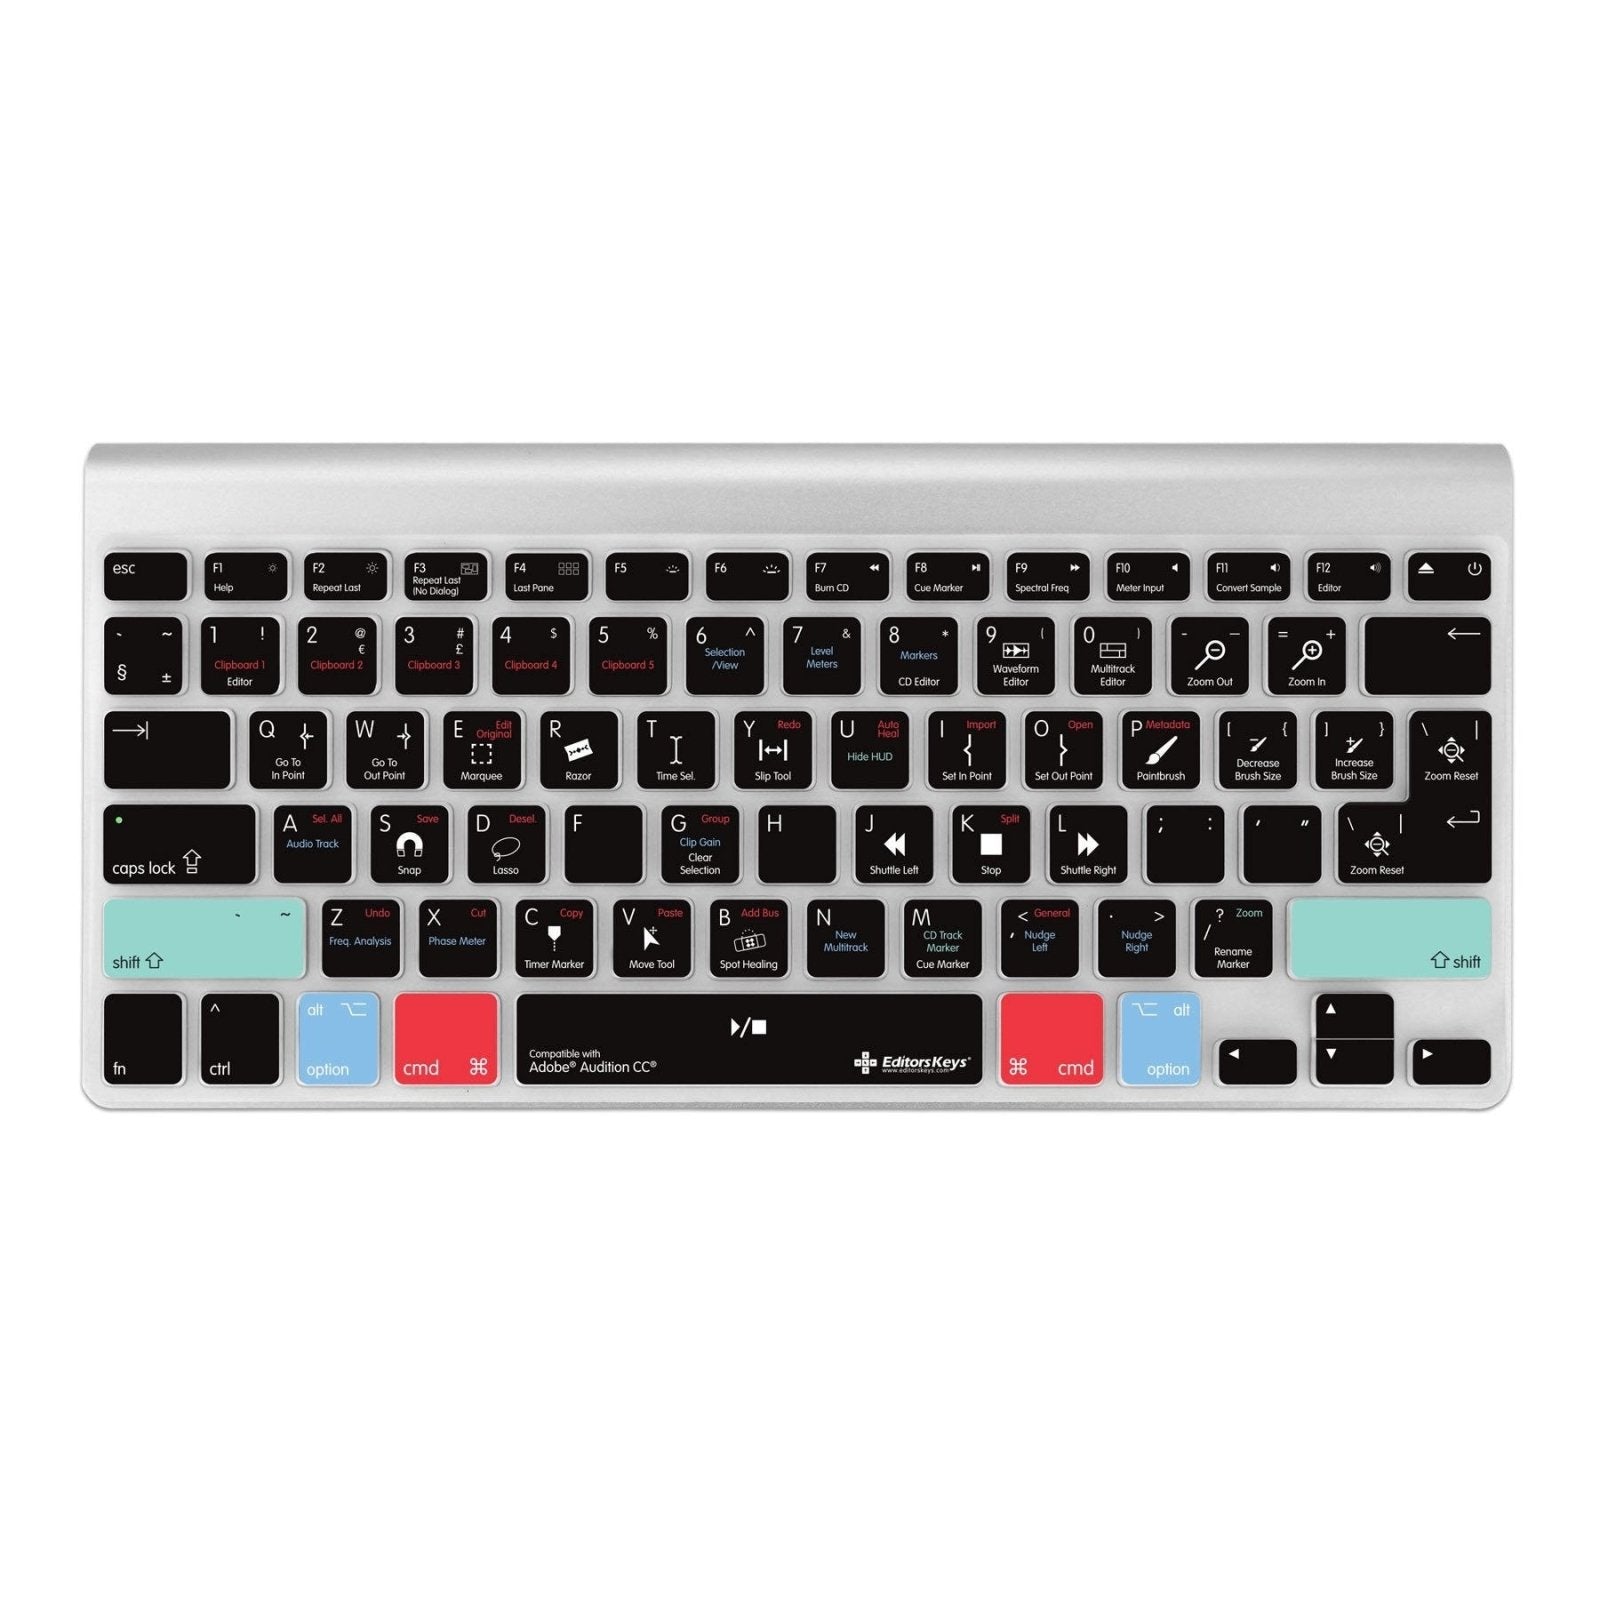 Adobe Audition Keyboard Covers for MacBook and iMac - Editors Keys